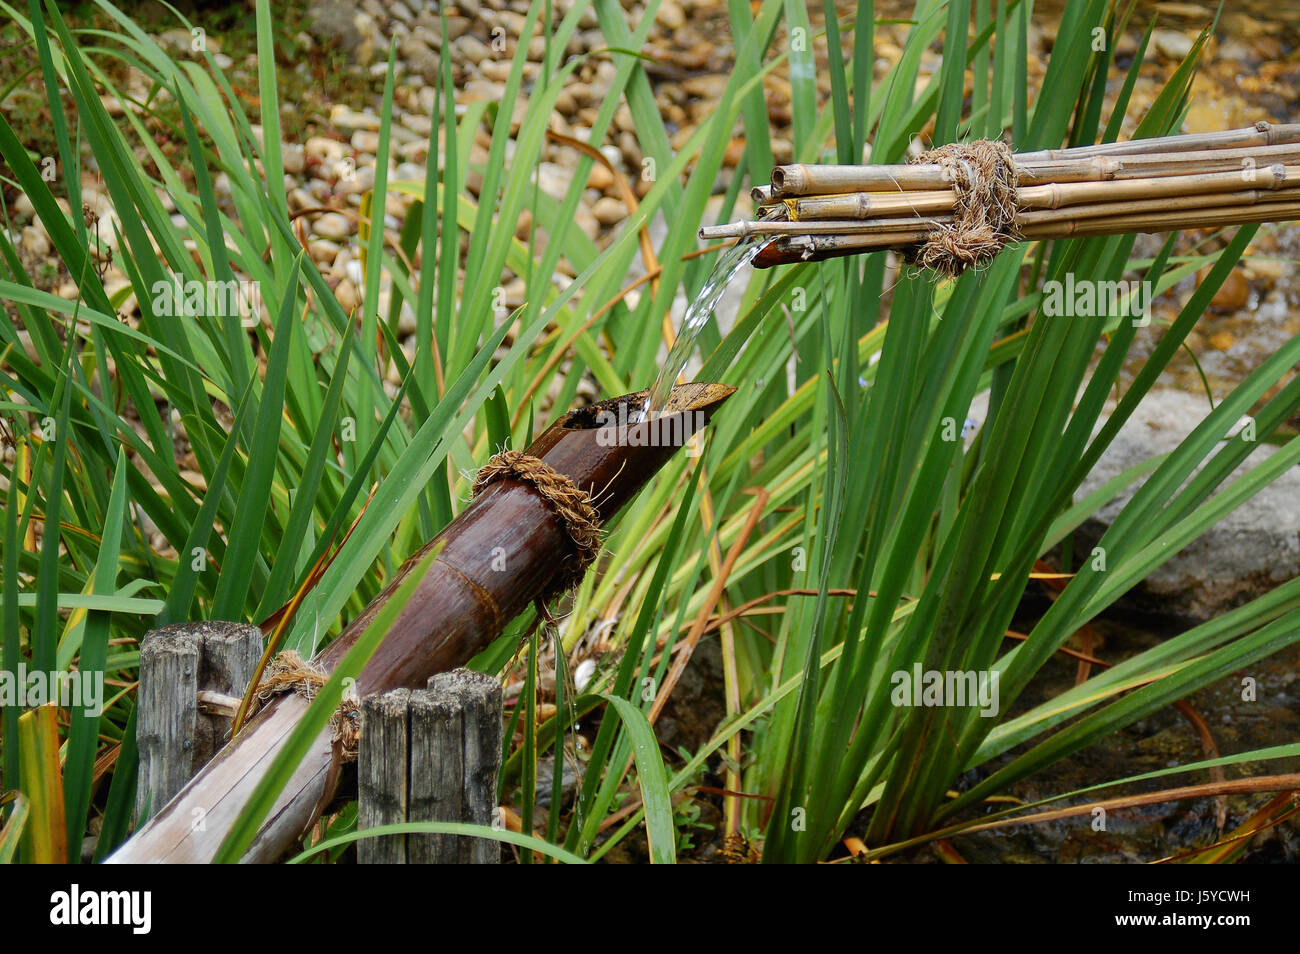 trick fountains bamboo canted water china stone trick fountains bamboo canted Stock Photo